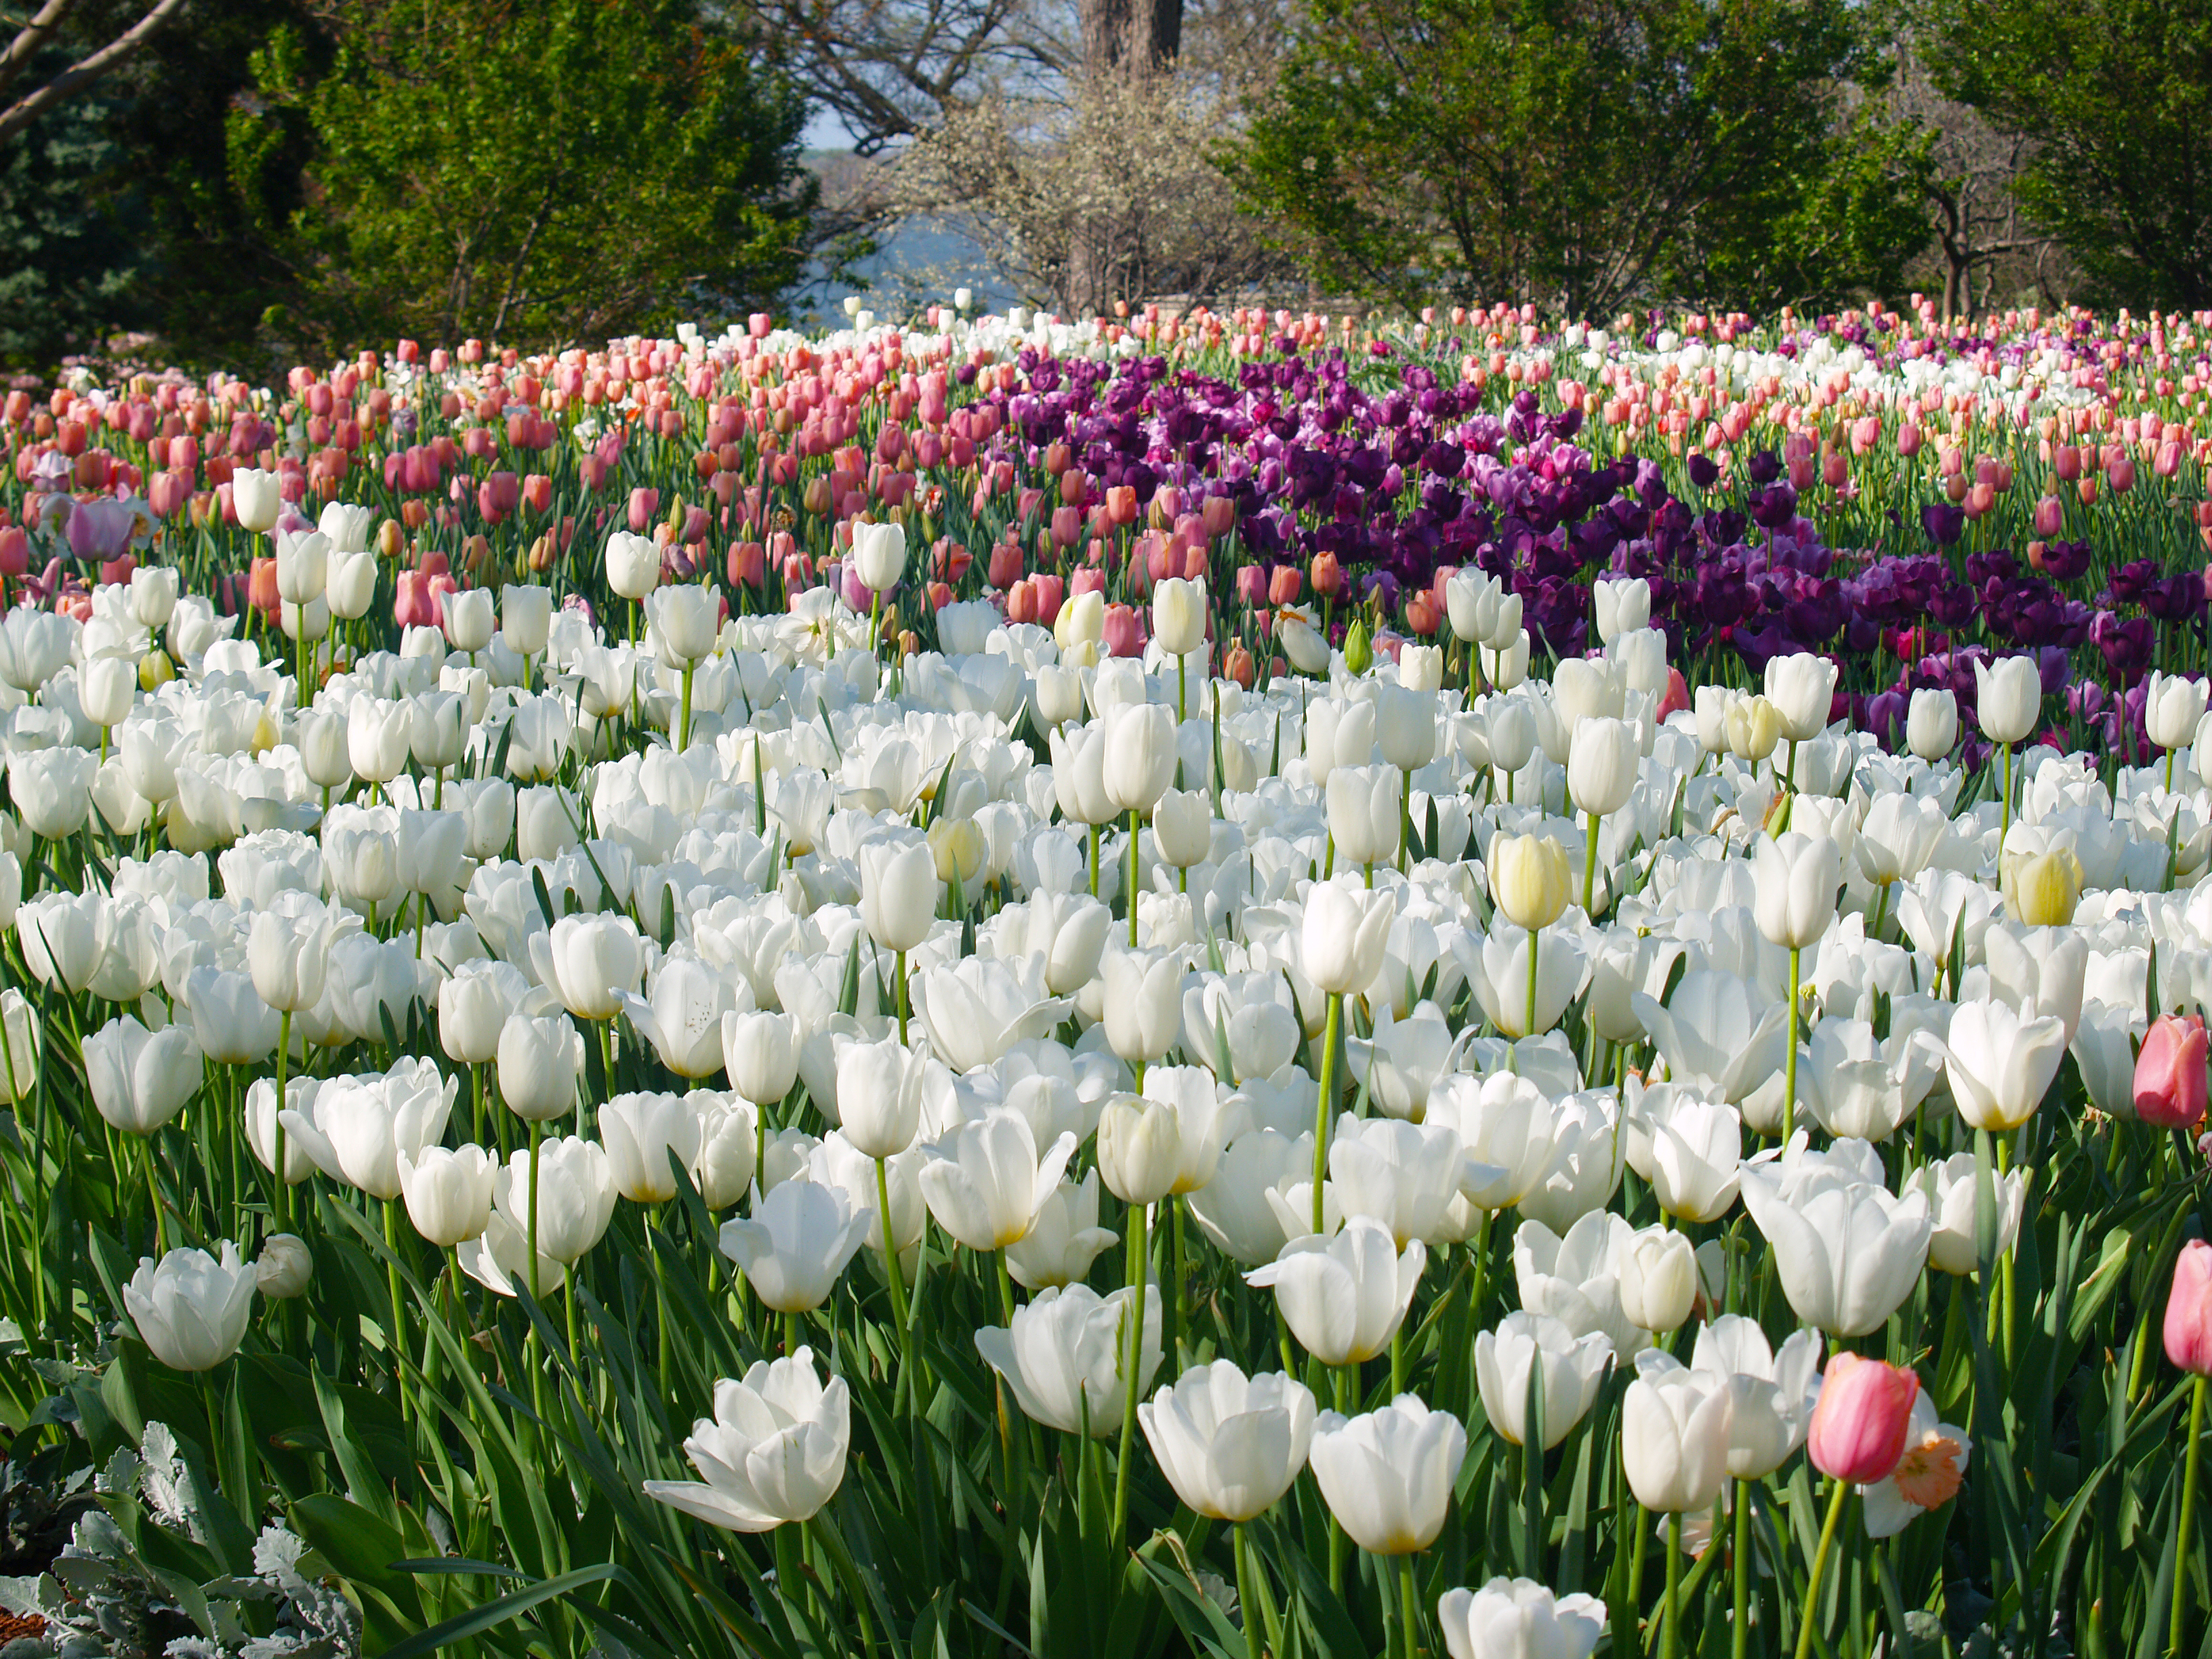 Dallas Arboretum and Botanical Garden, Monday, January 18, 2021, Press release picture